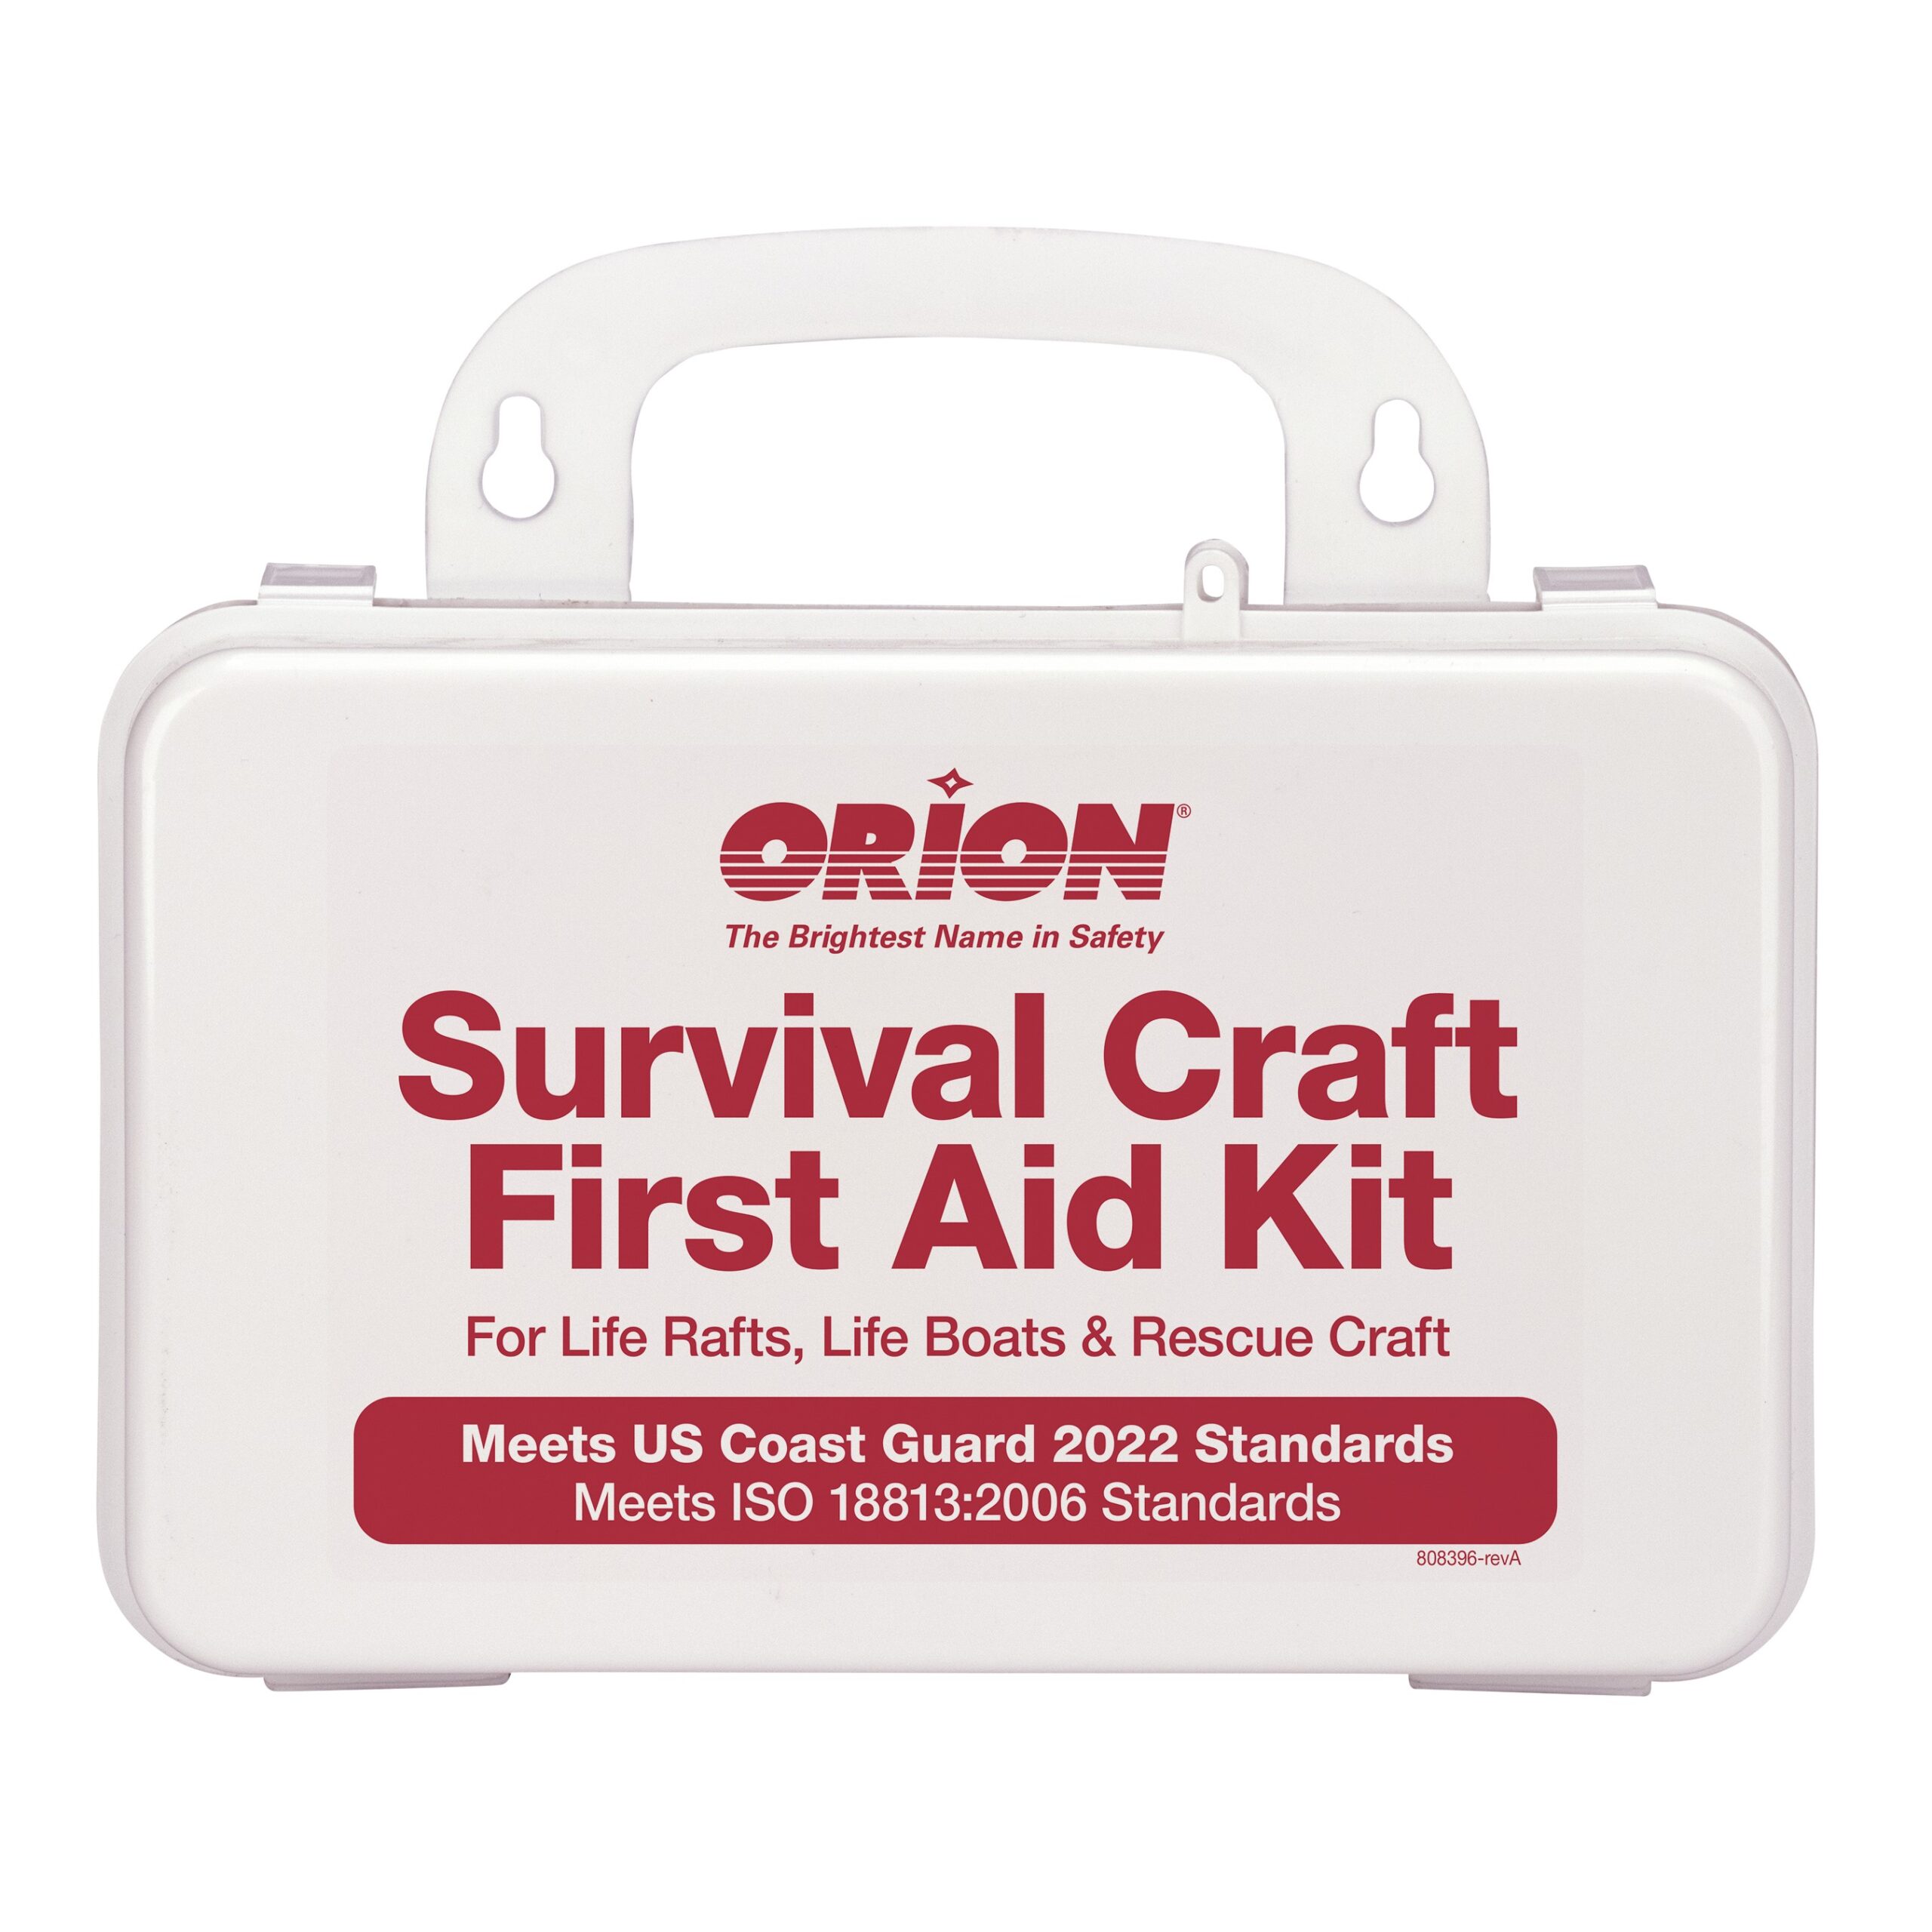 Survival Craft First Aid Kit